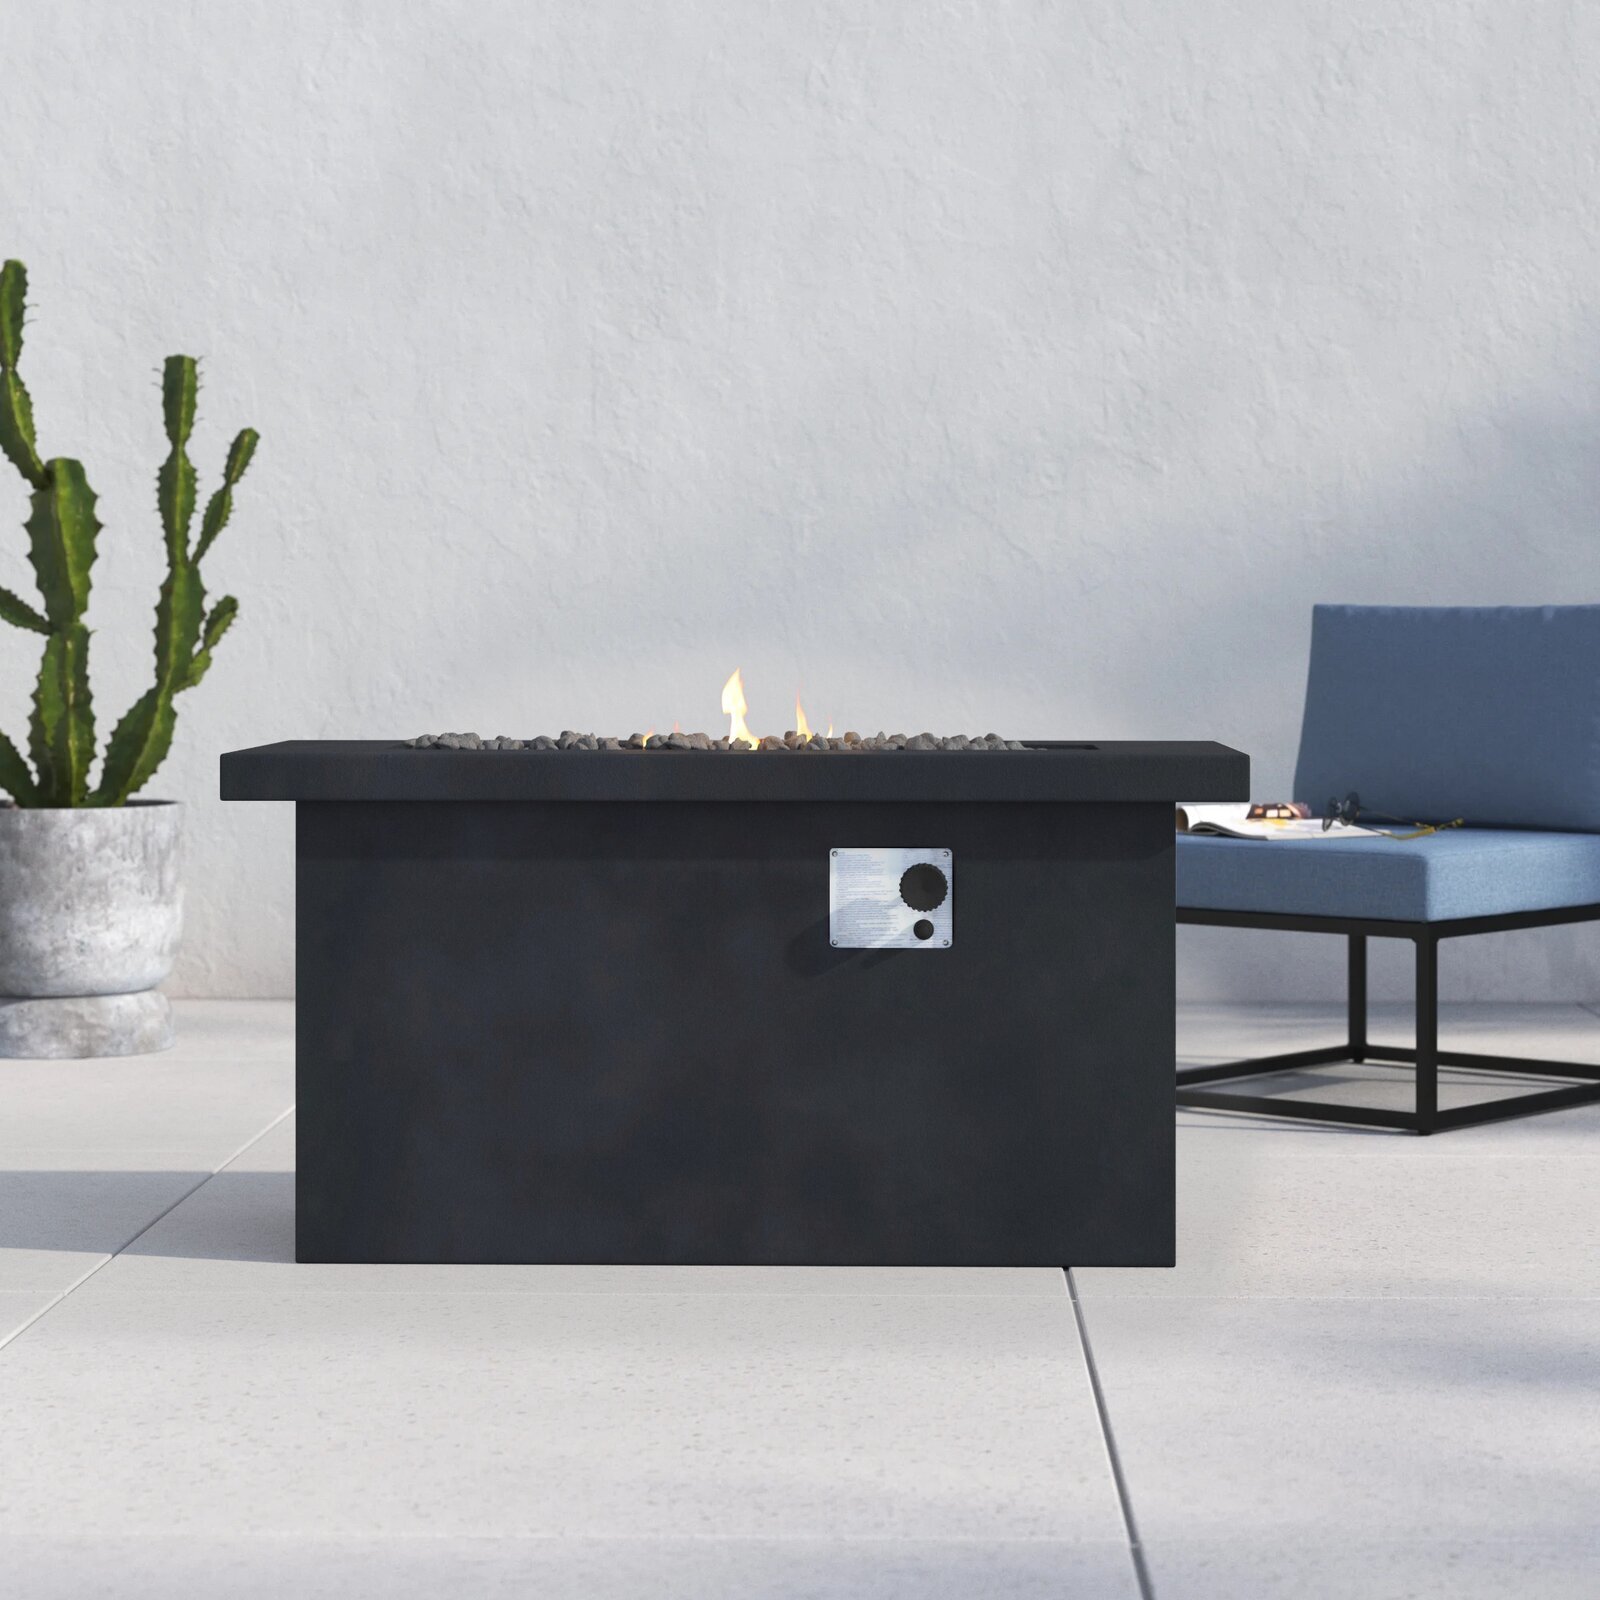 Aly Fiber Outdoor Gas Fire Pit Table